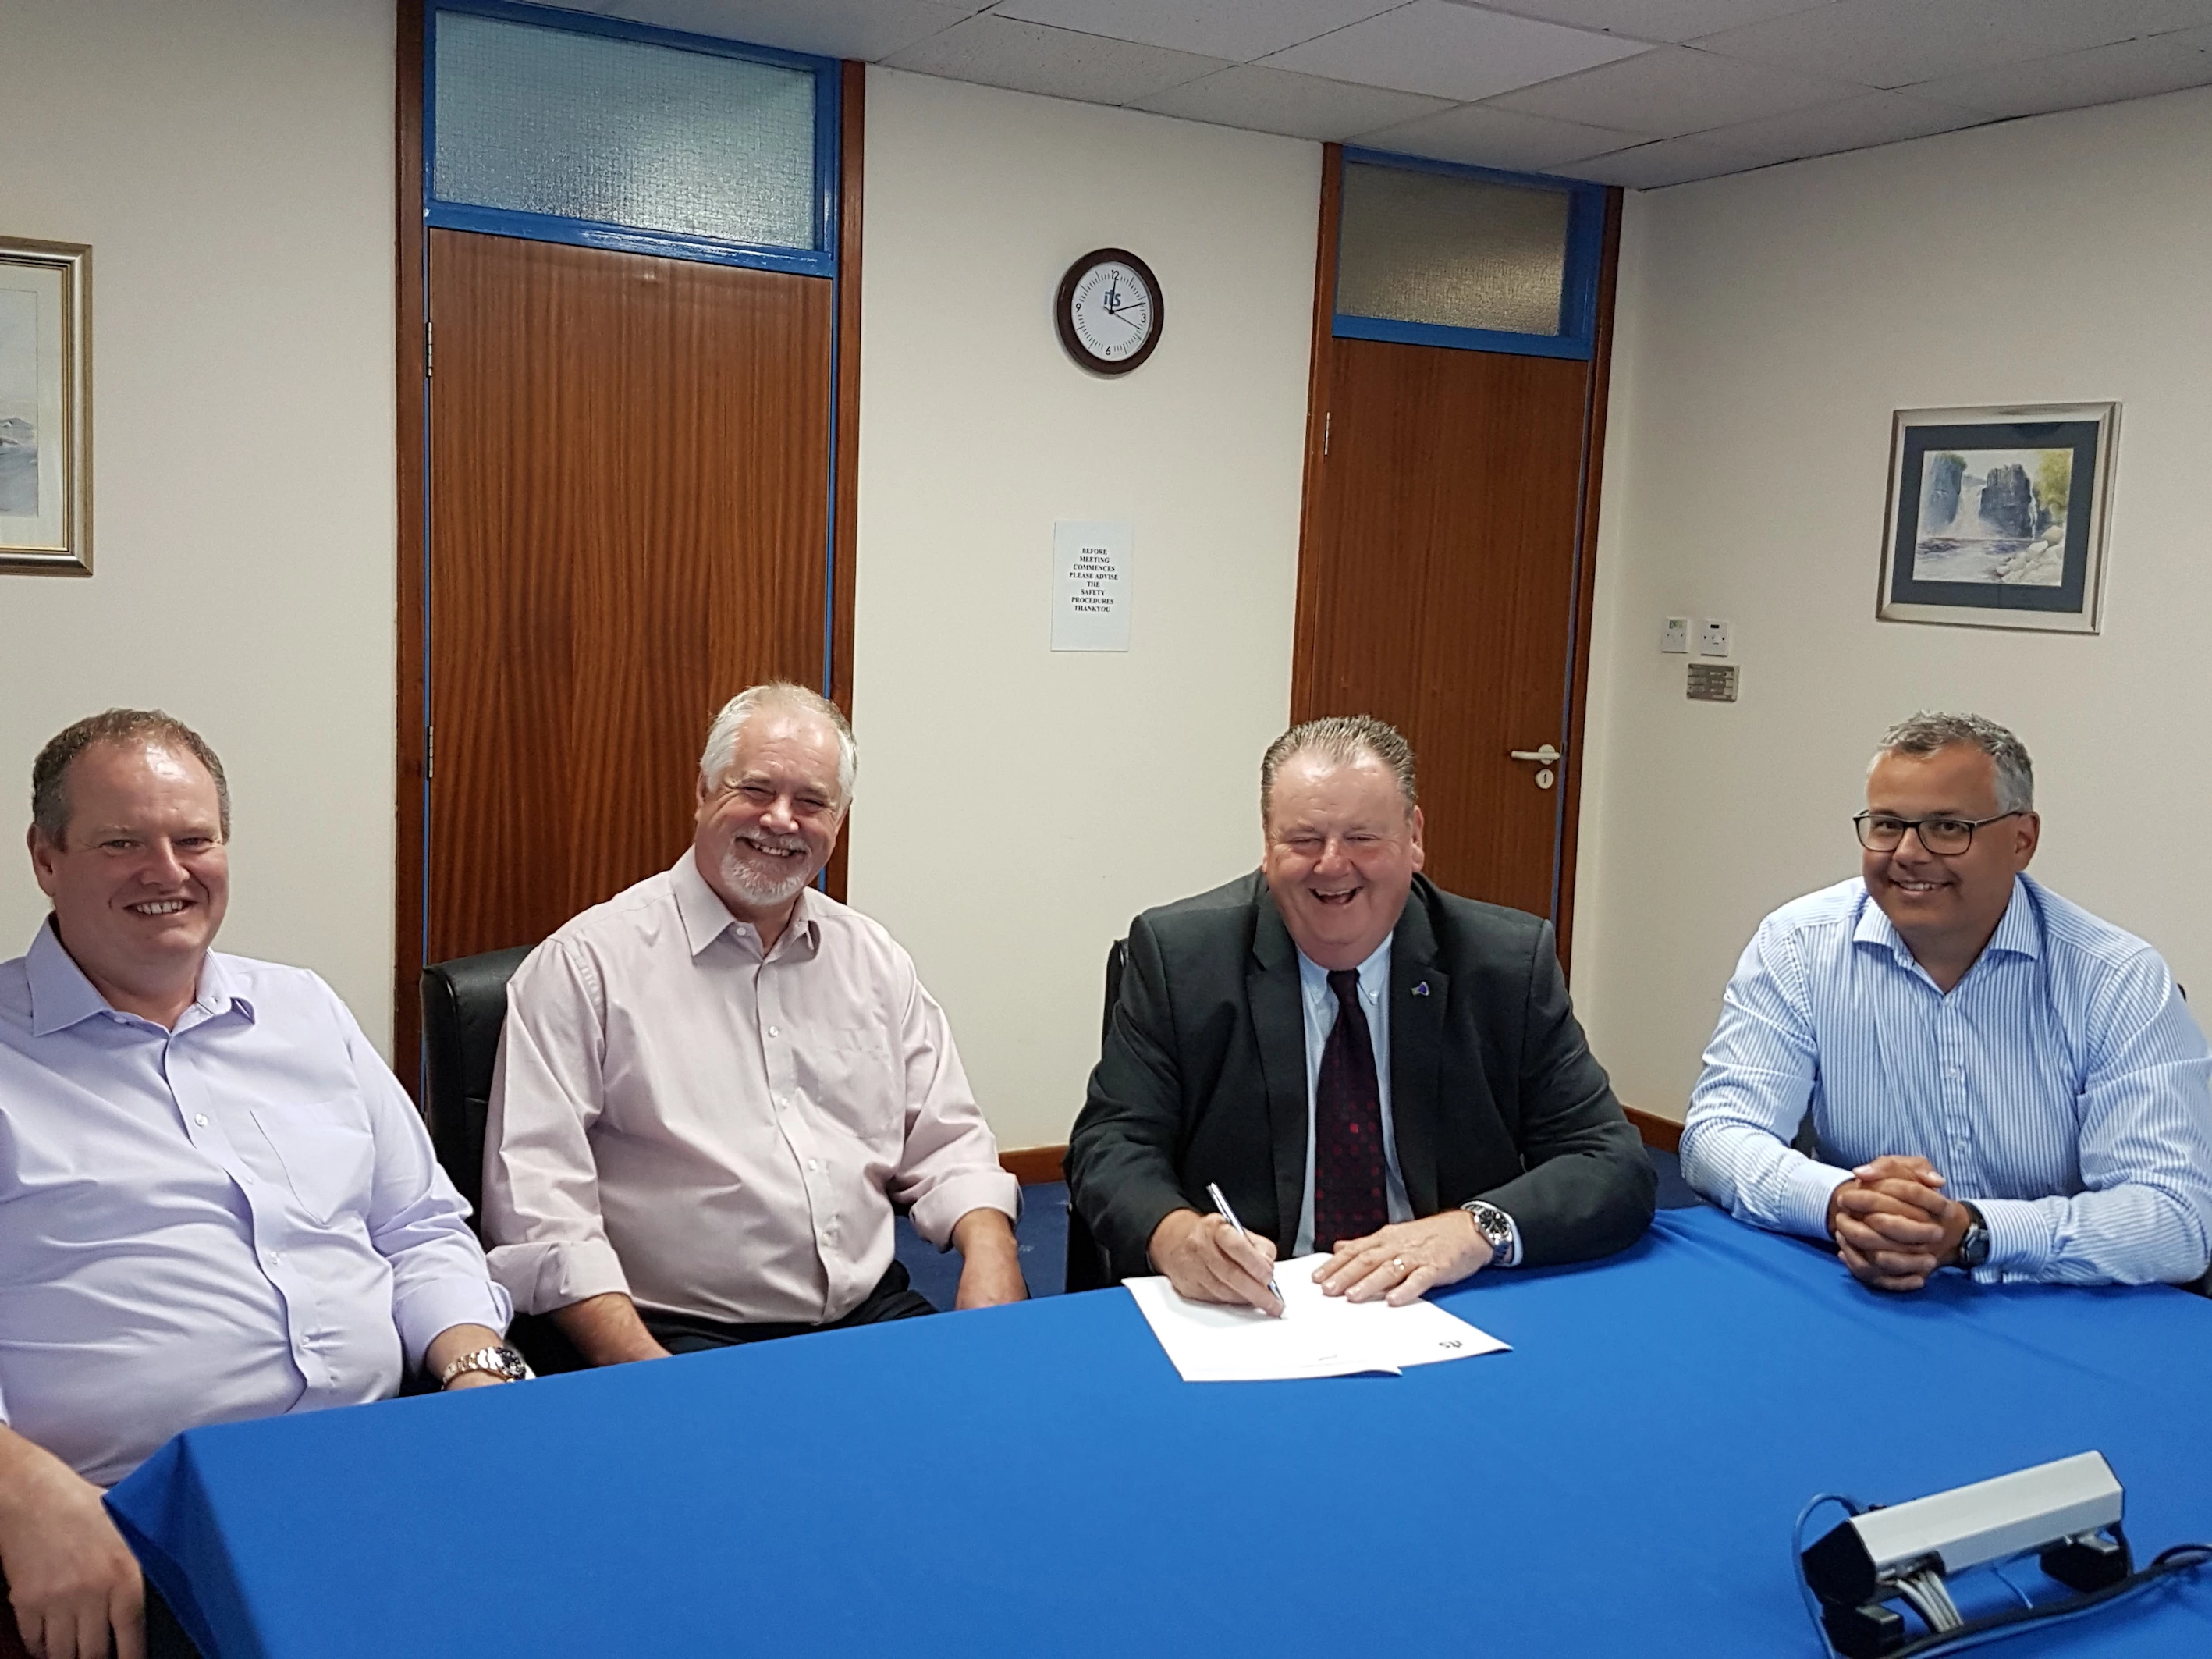 Dr Stan Higgins (third from left) is welcomed to ITS by, left to right: Mark Taylor (business development director, ITS), Malcolm Knott (managing director, ITS) and Graham Ives (projects director, ITS)